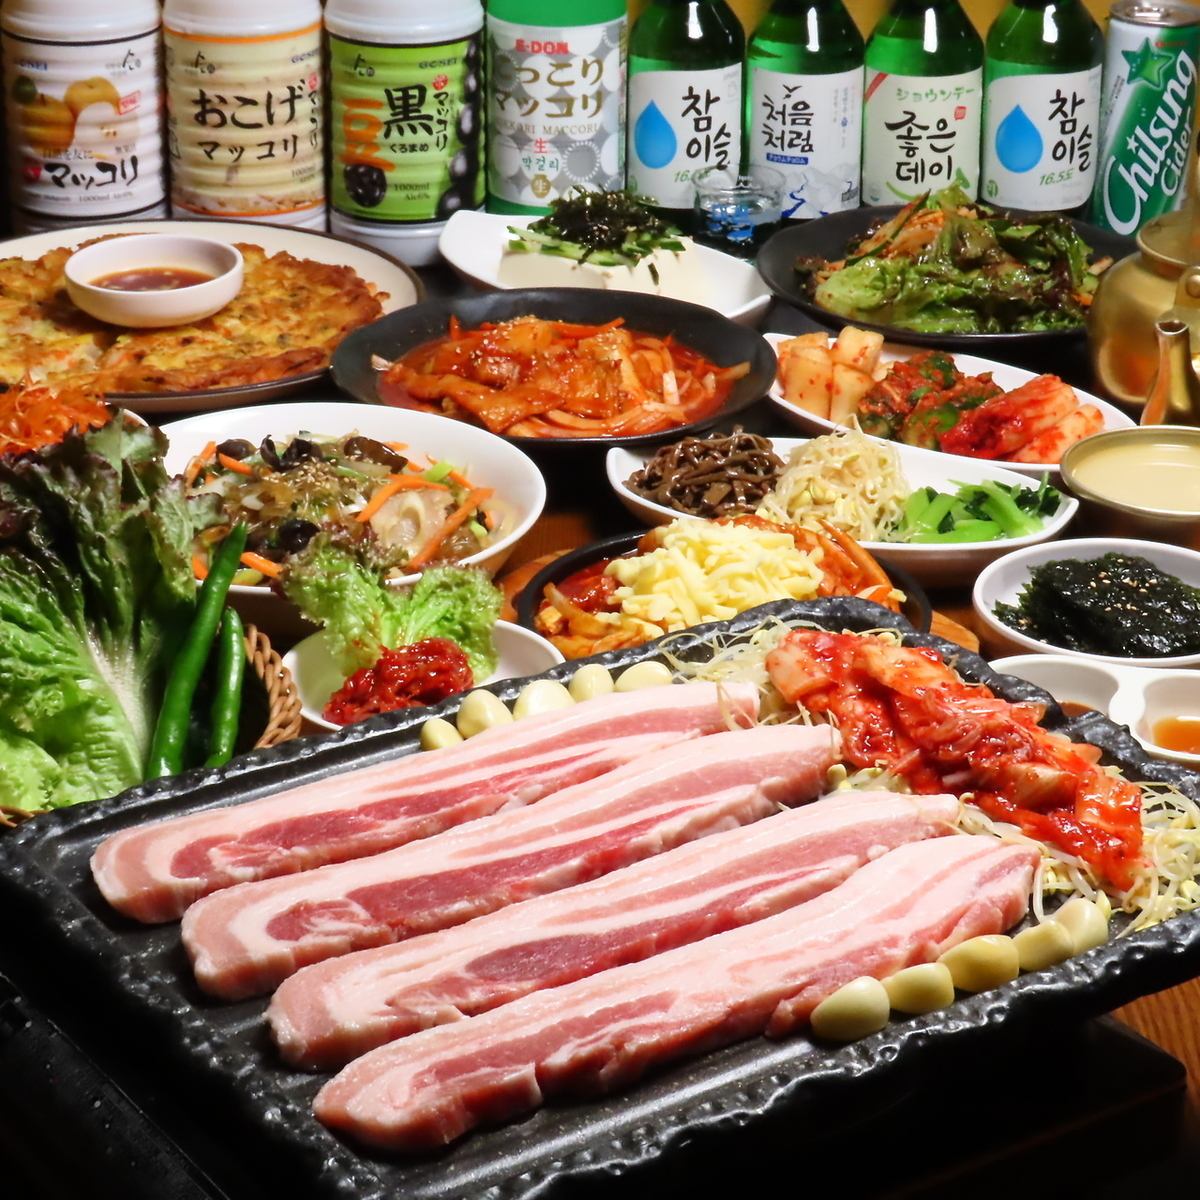 Our restaurant offers many Korean dishes including samgyeopsal.